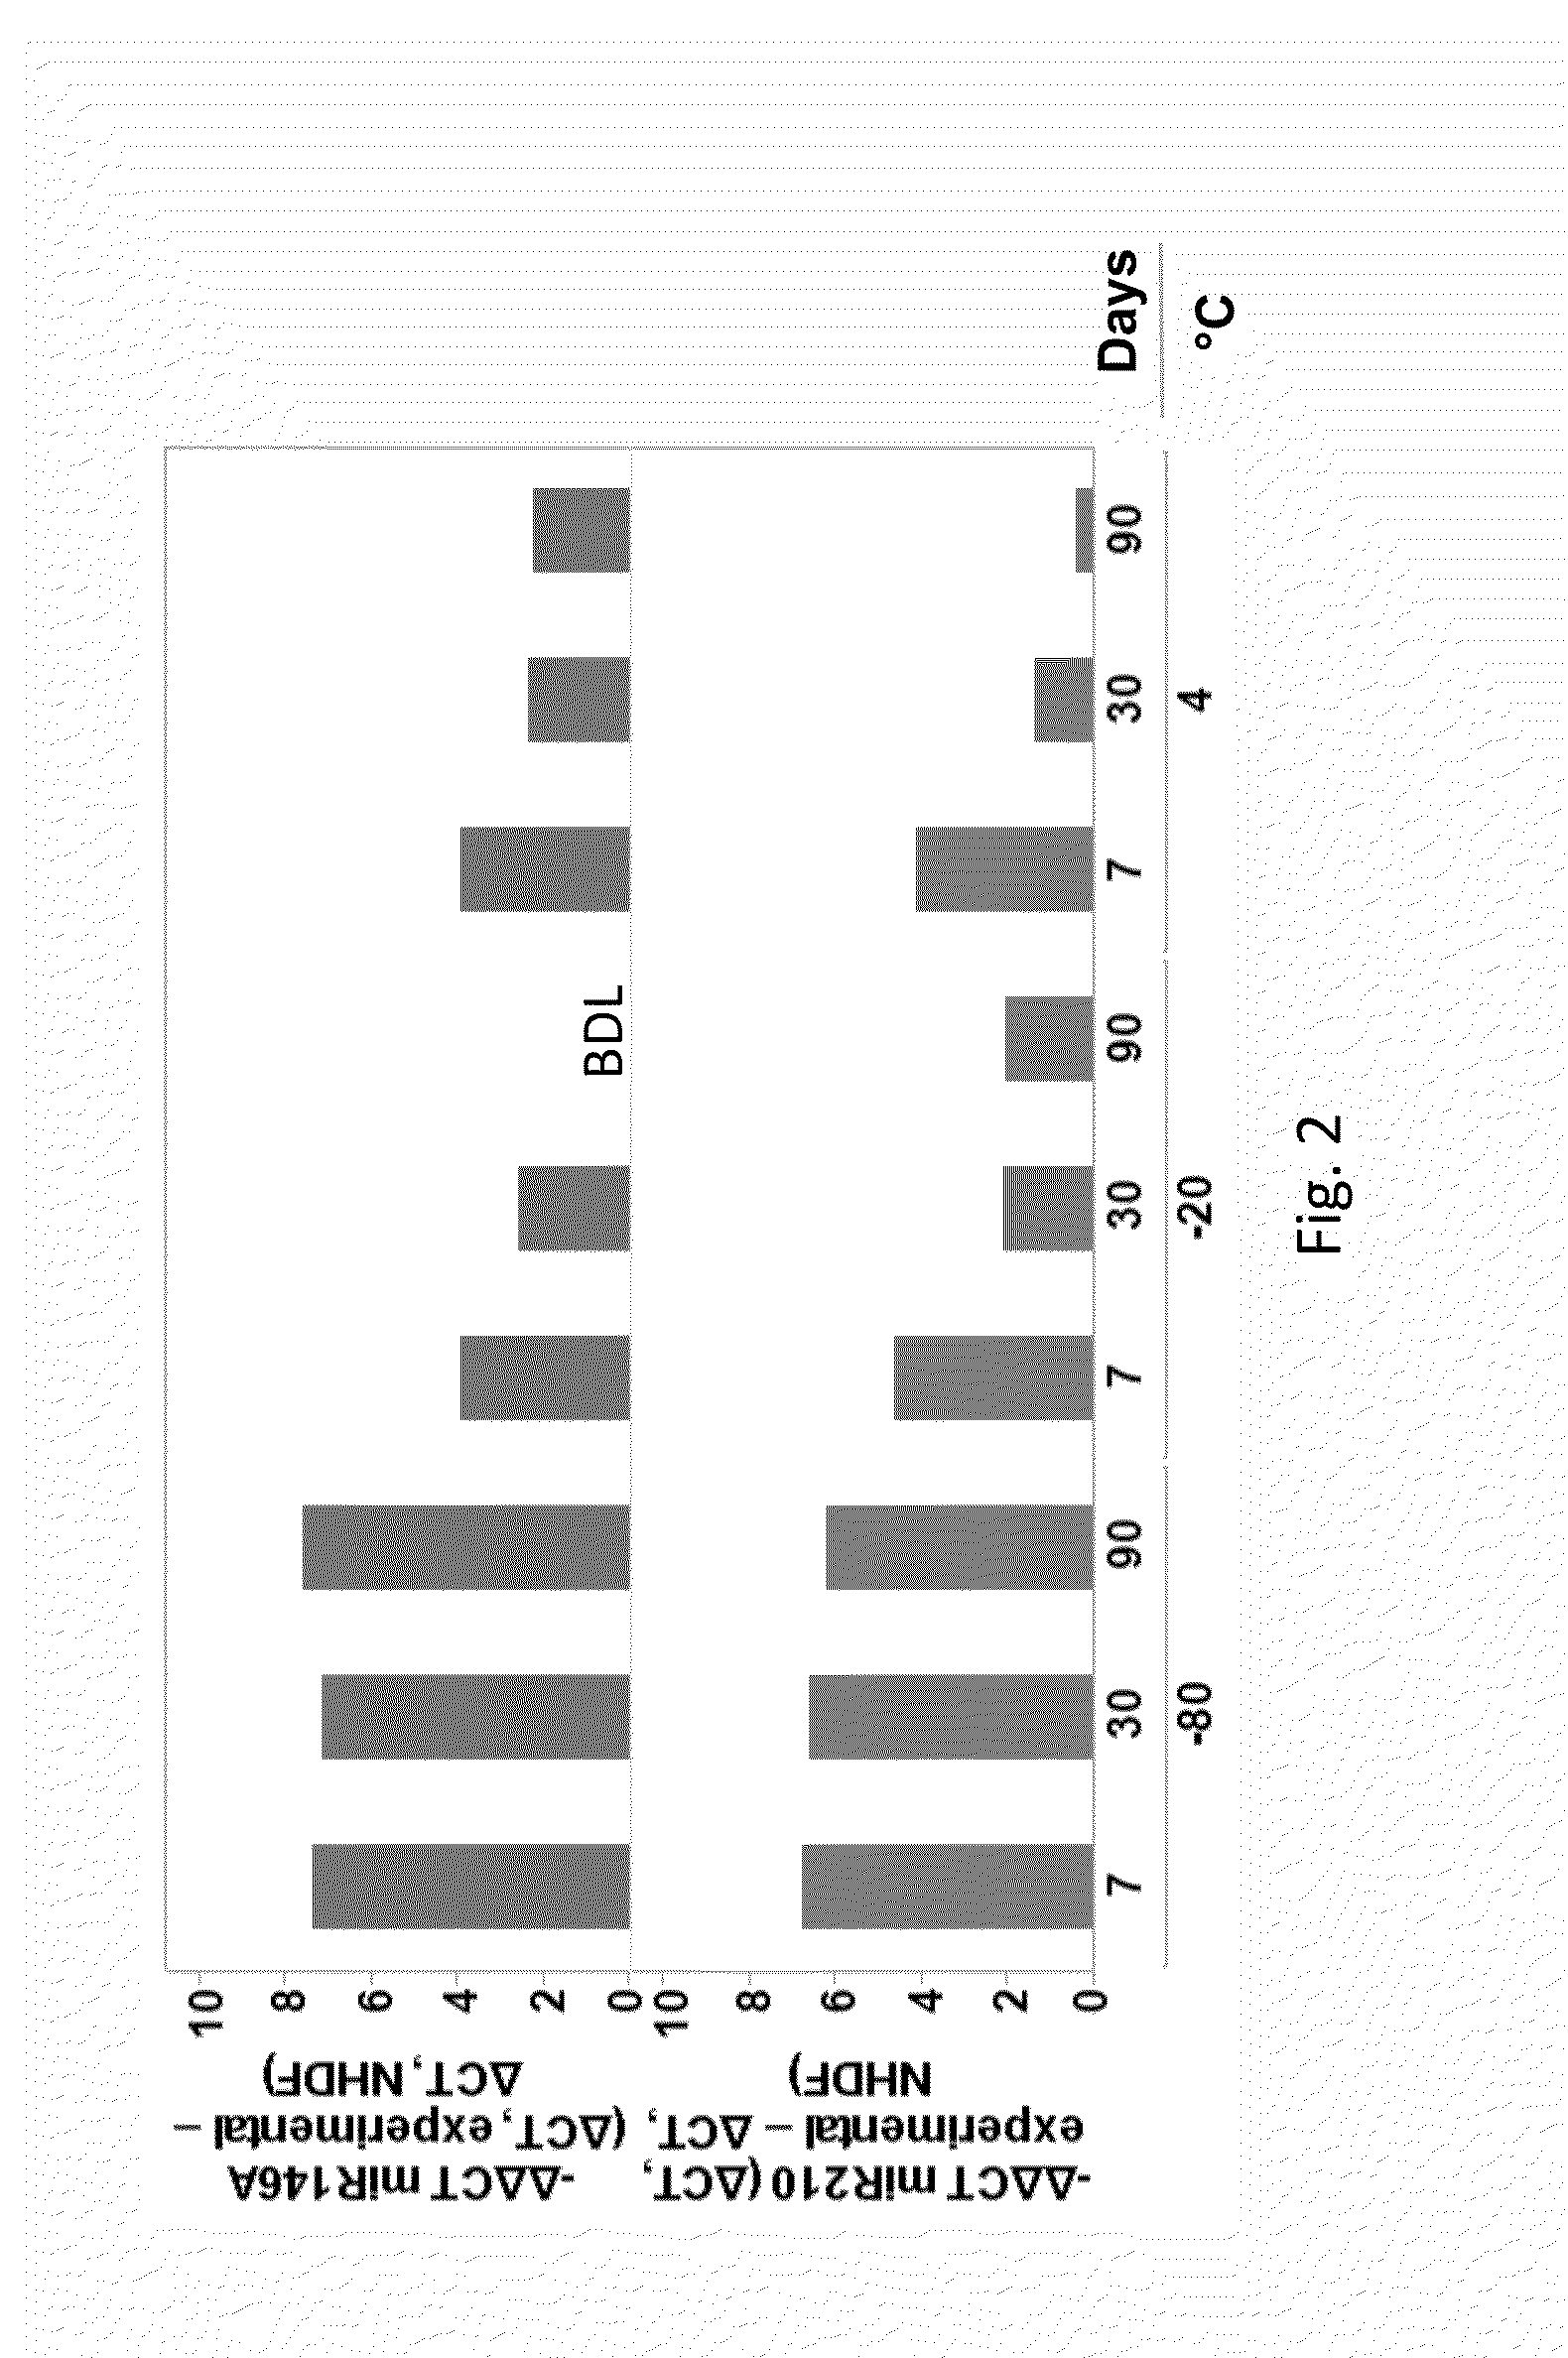 Processes for producing stable exosome formulations